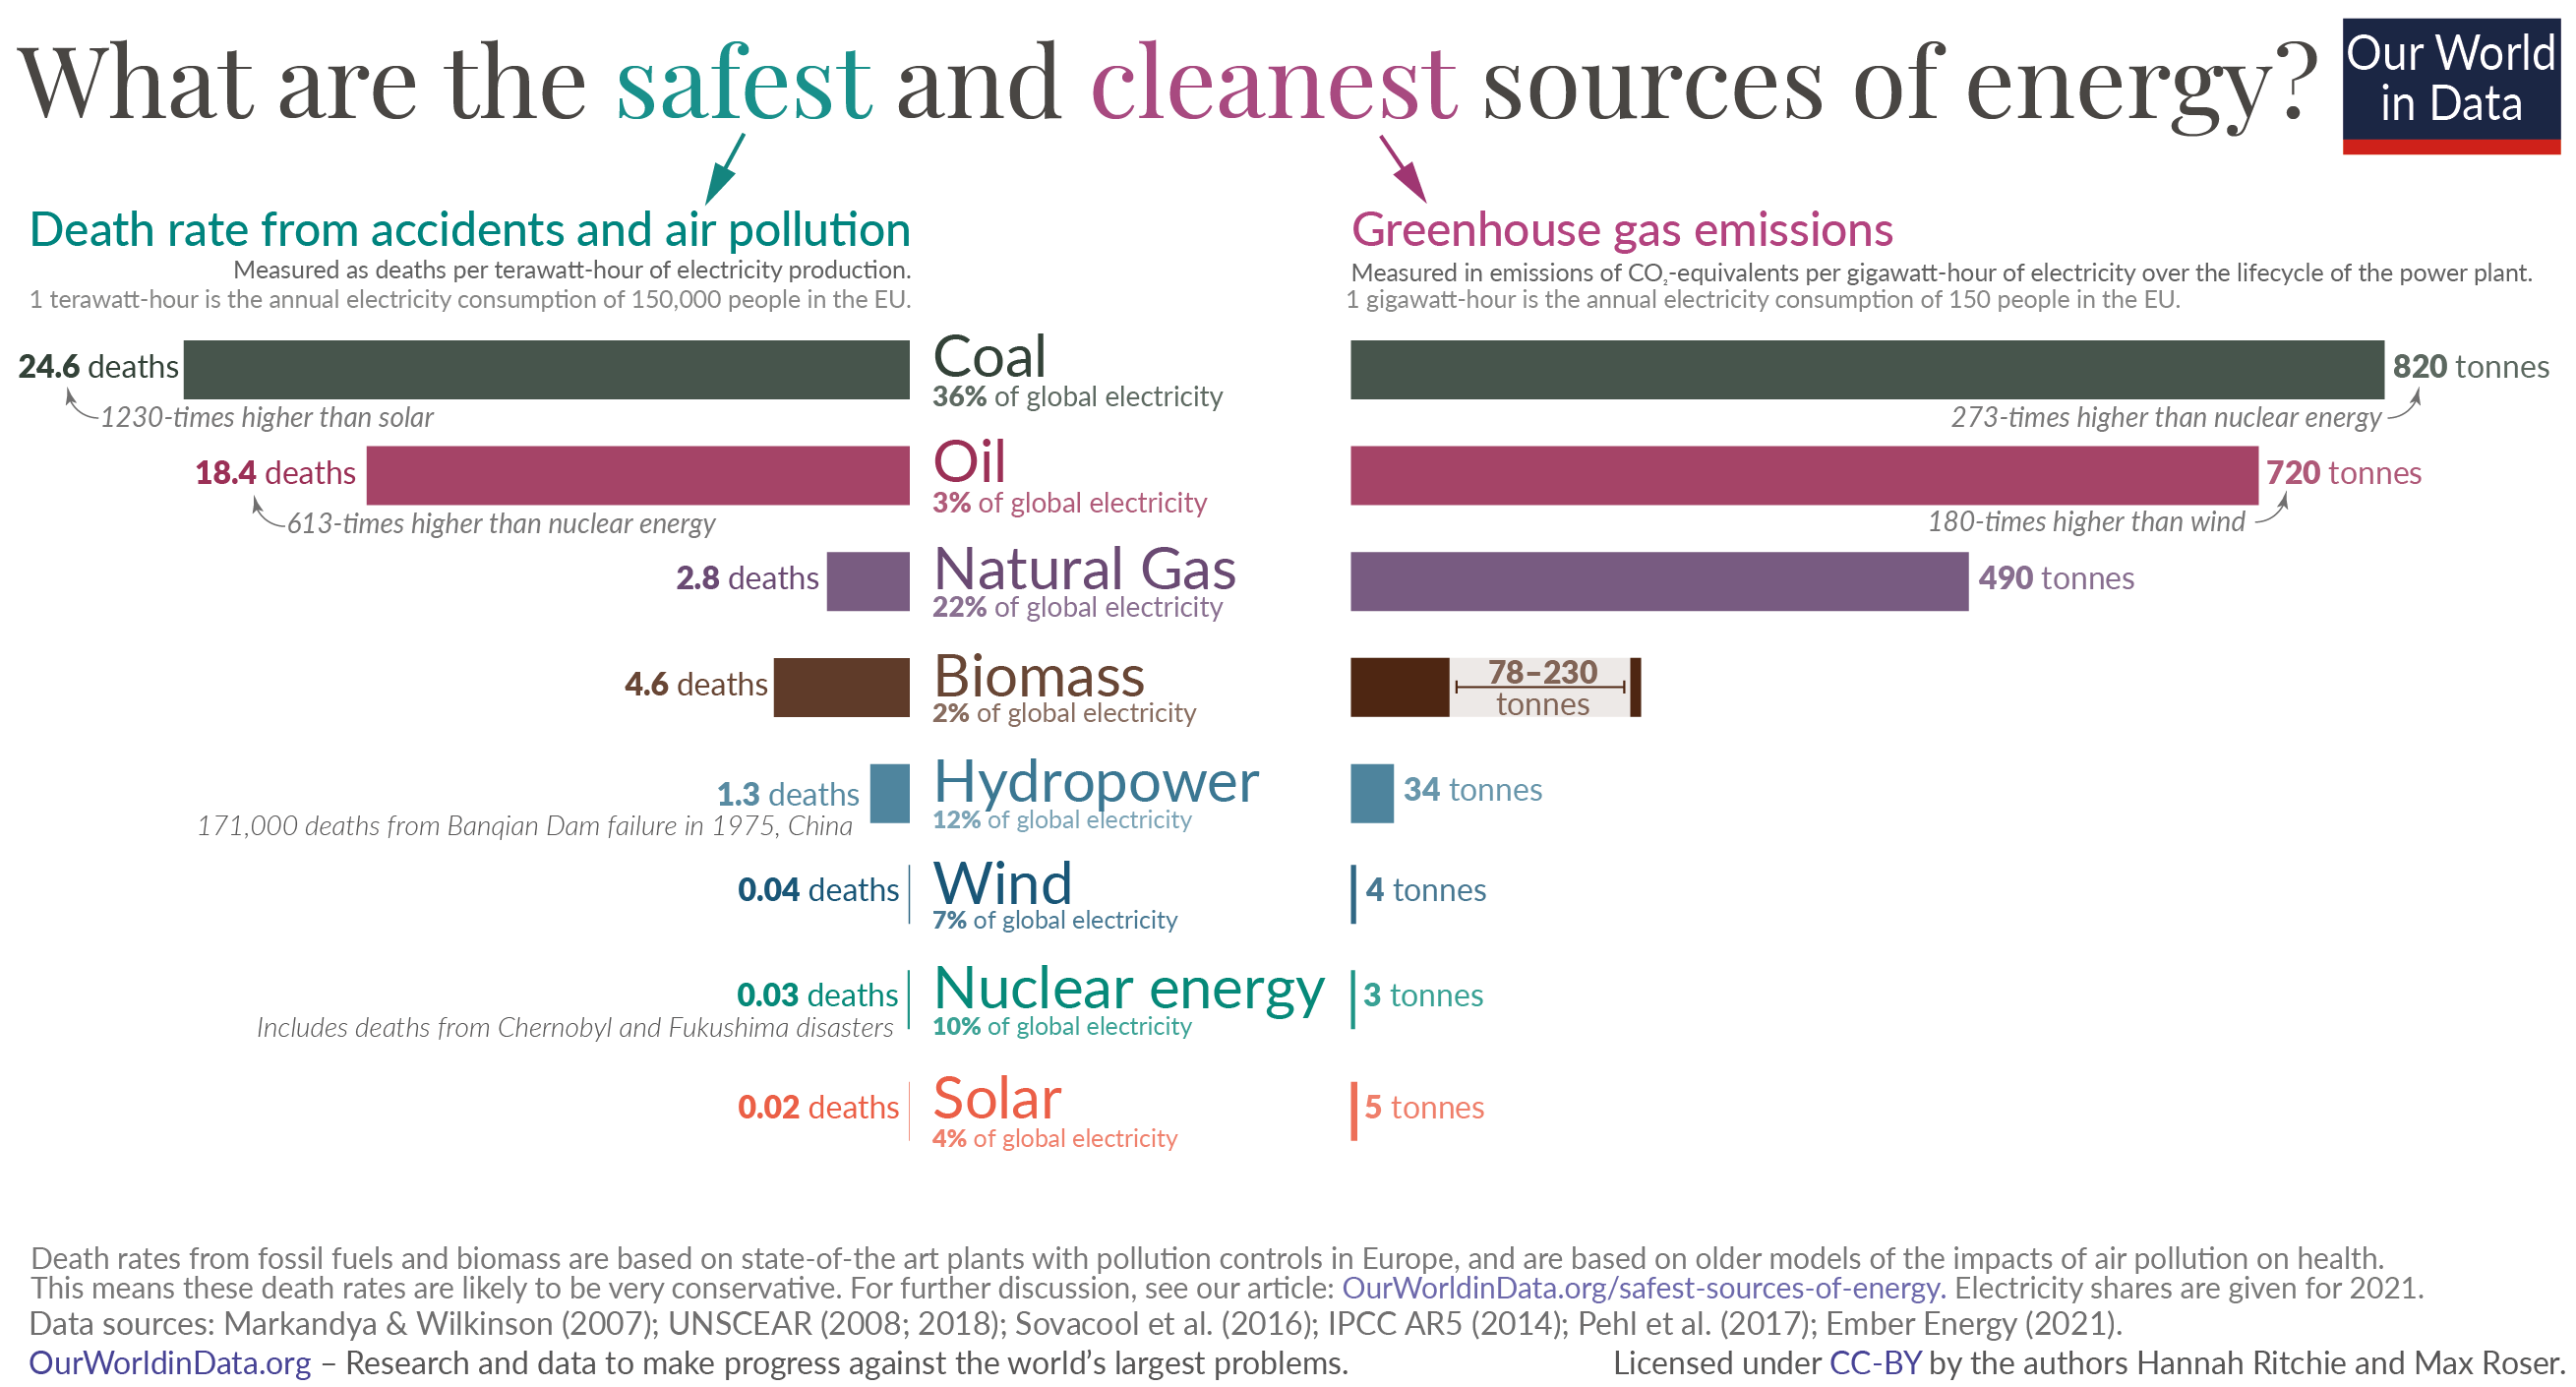 Safest and cleanest sources of energy